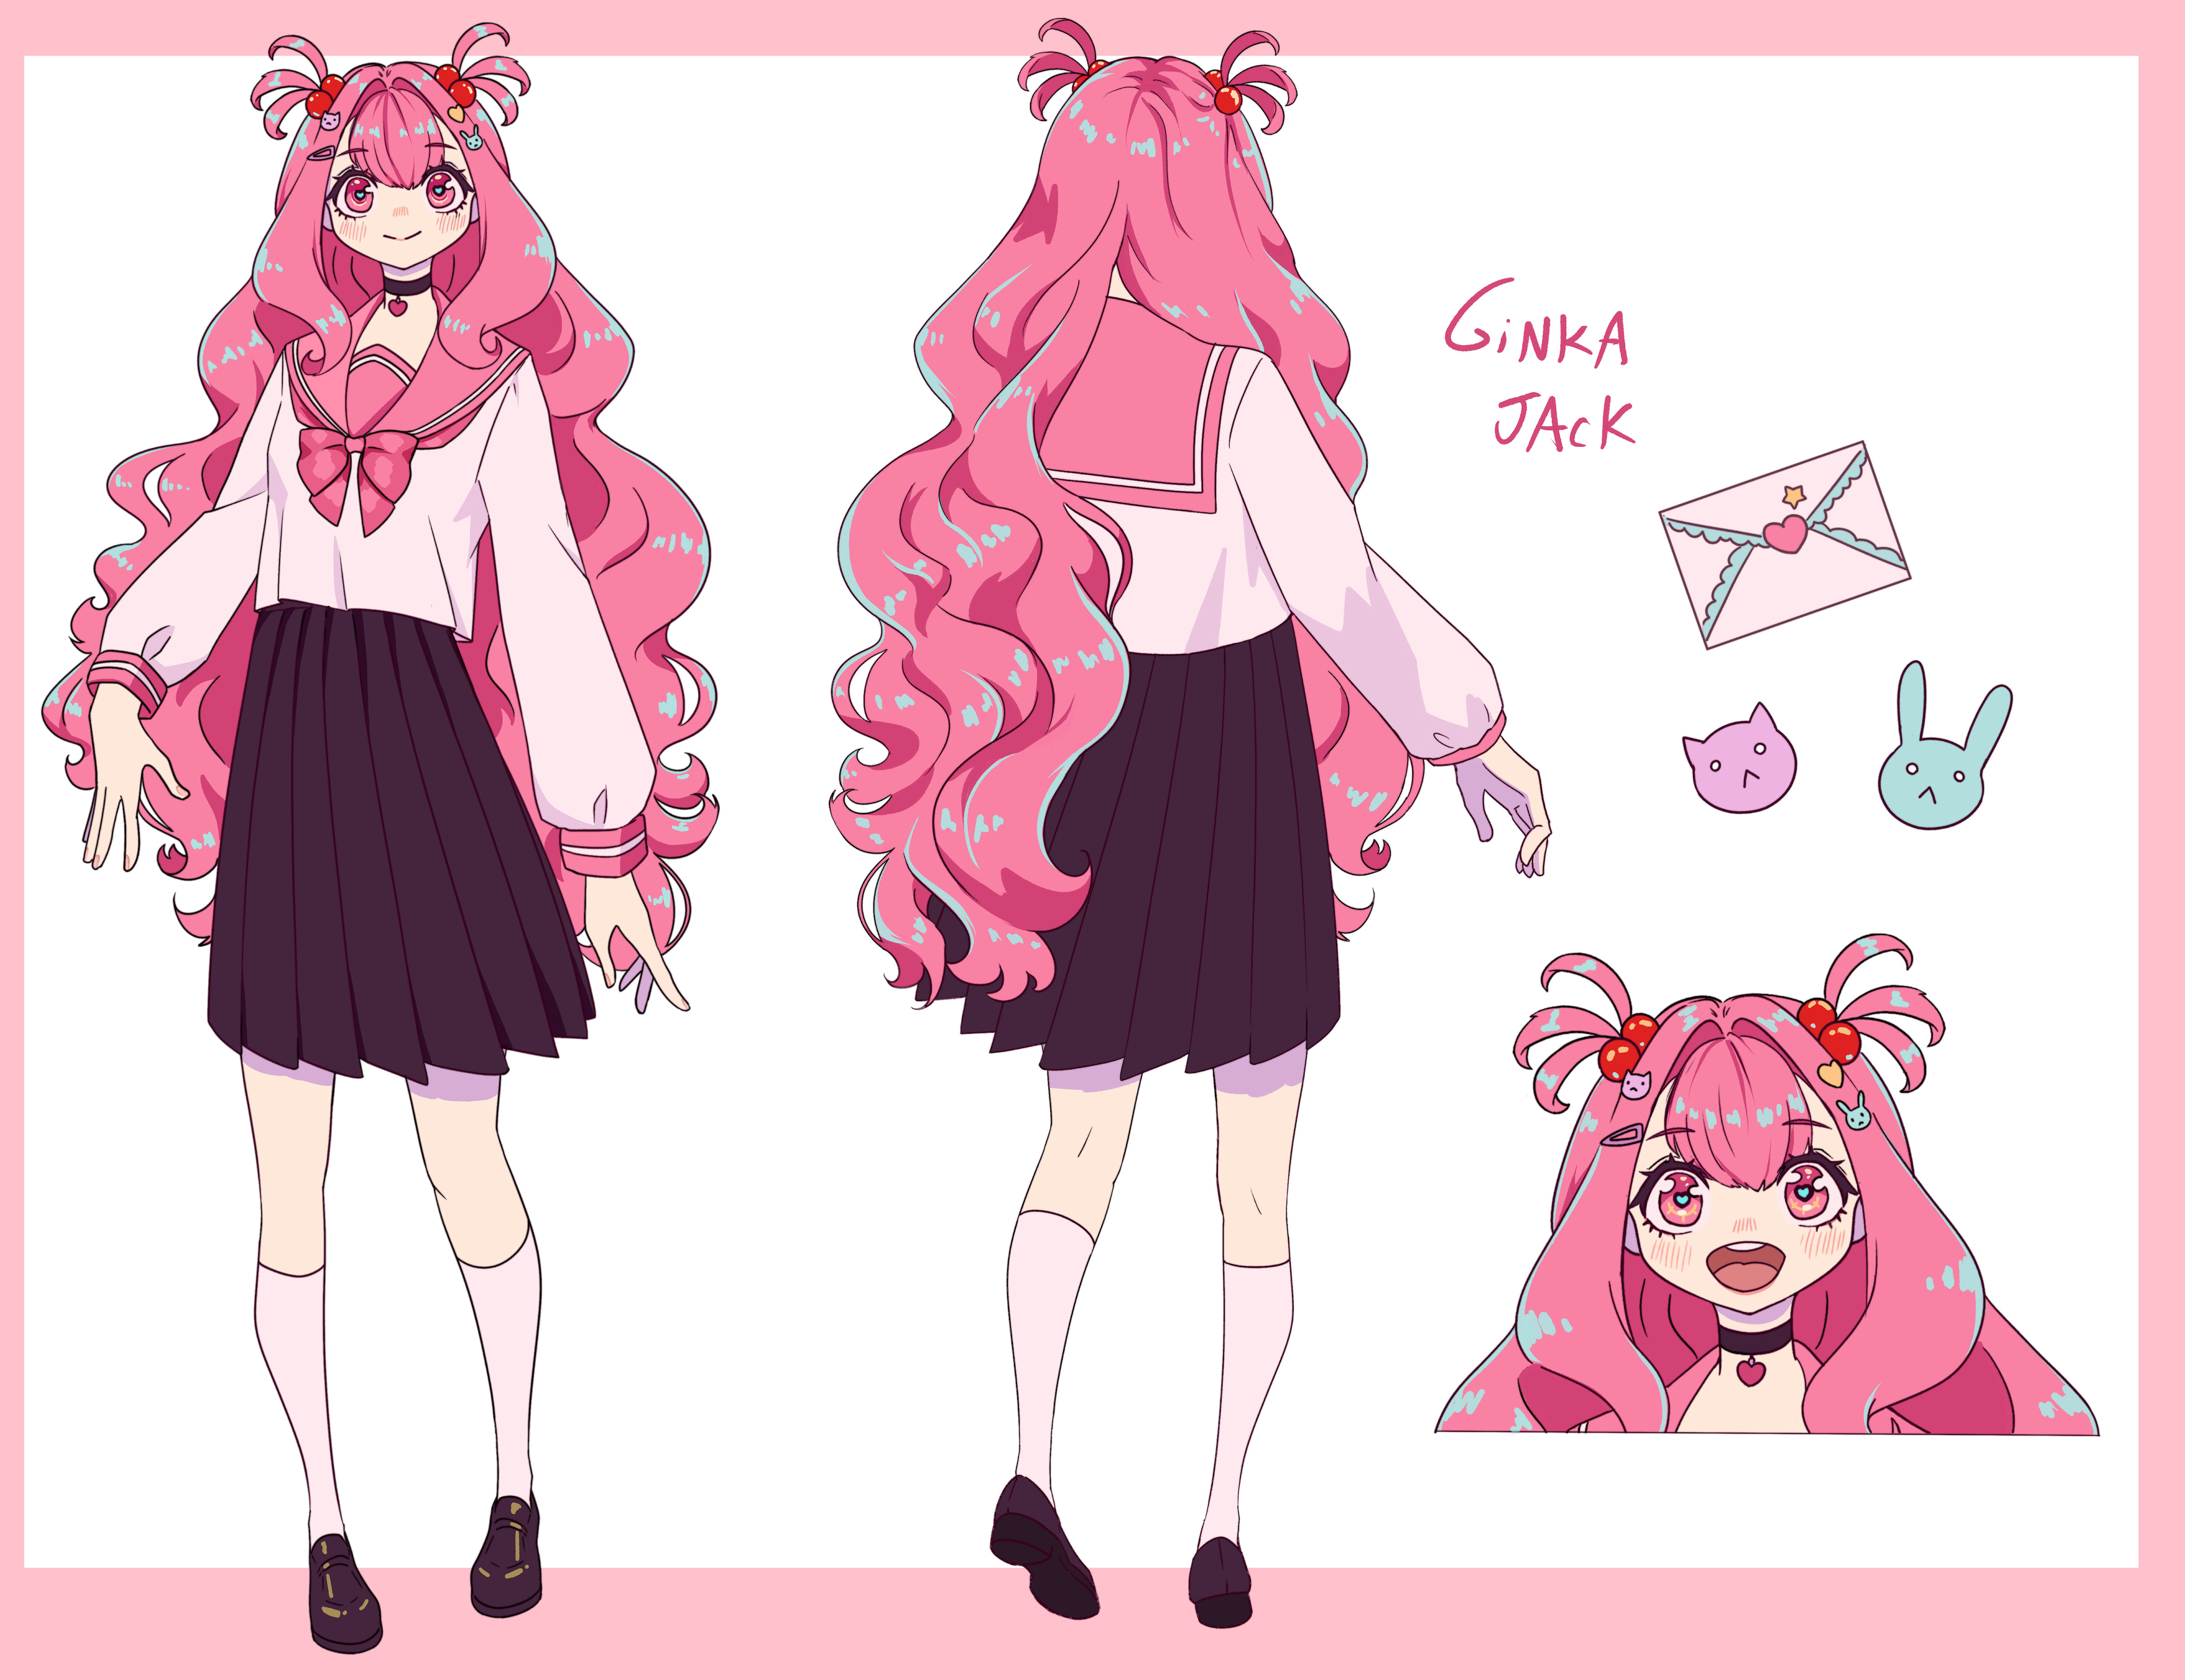 Hi Im KIYONA Heres my official character reference sheet I hope we can  get along  Social links in the comment  rVirtualYoutubers